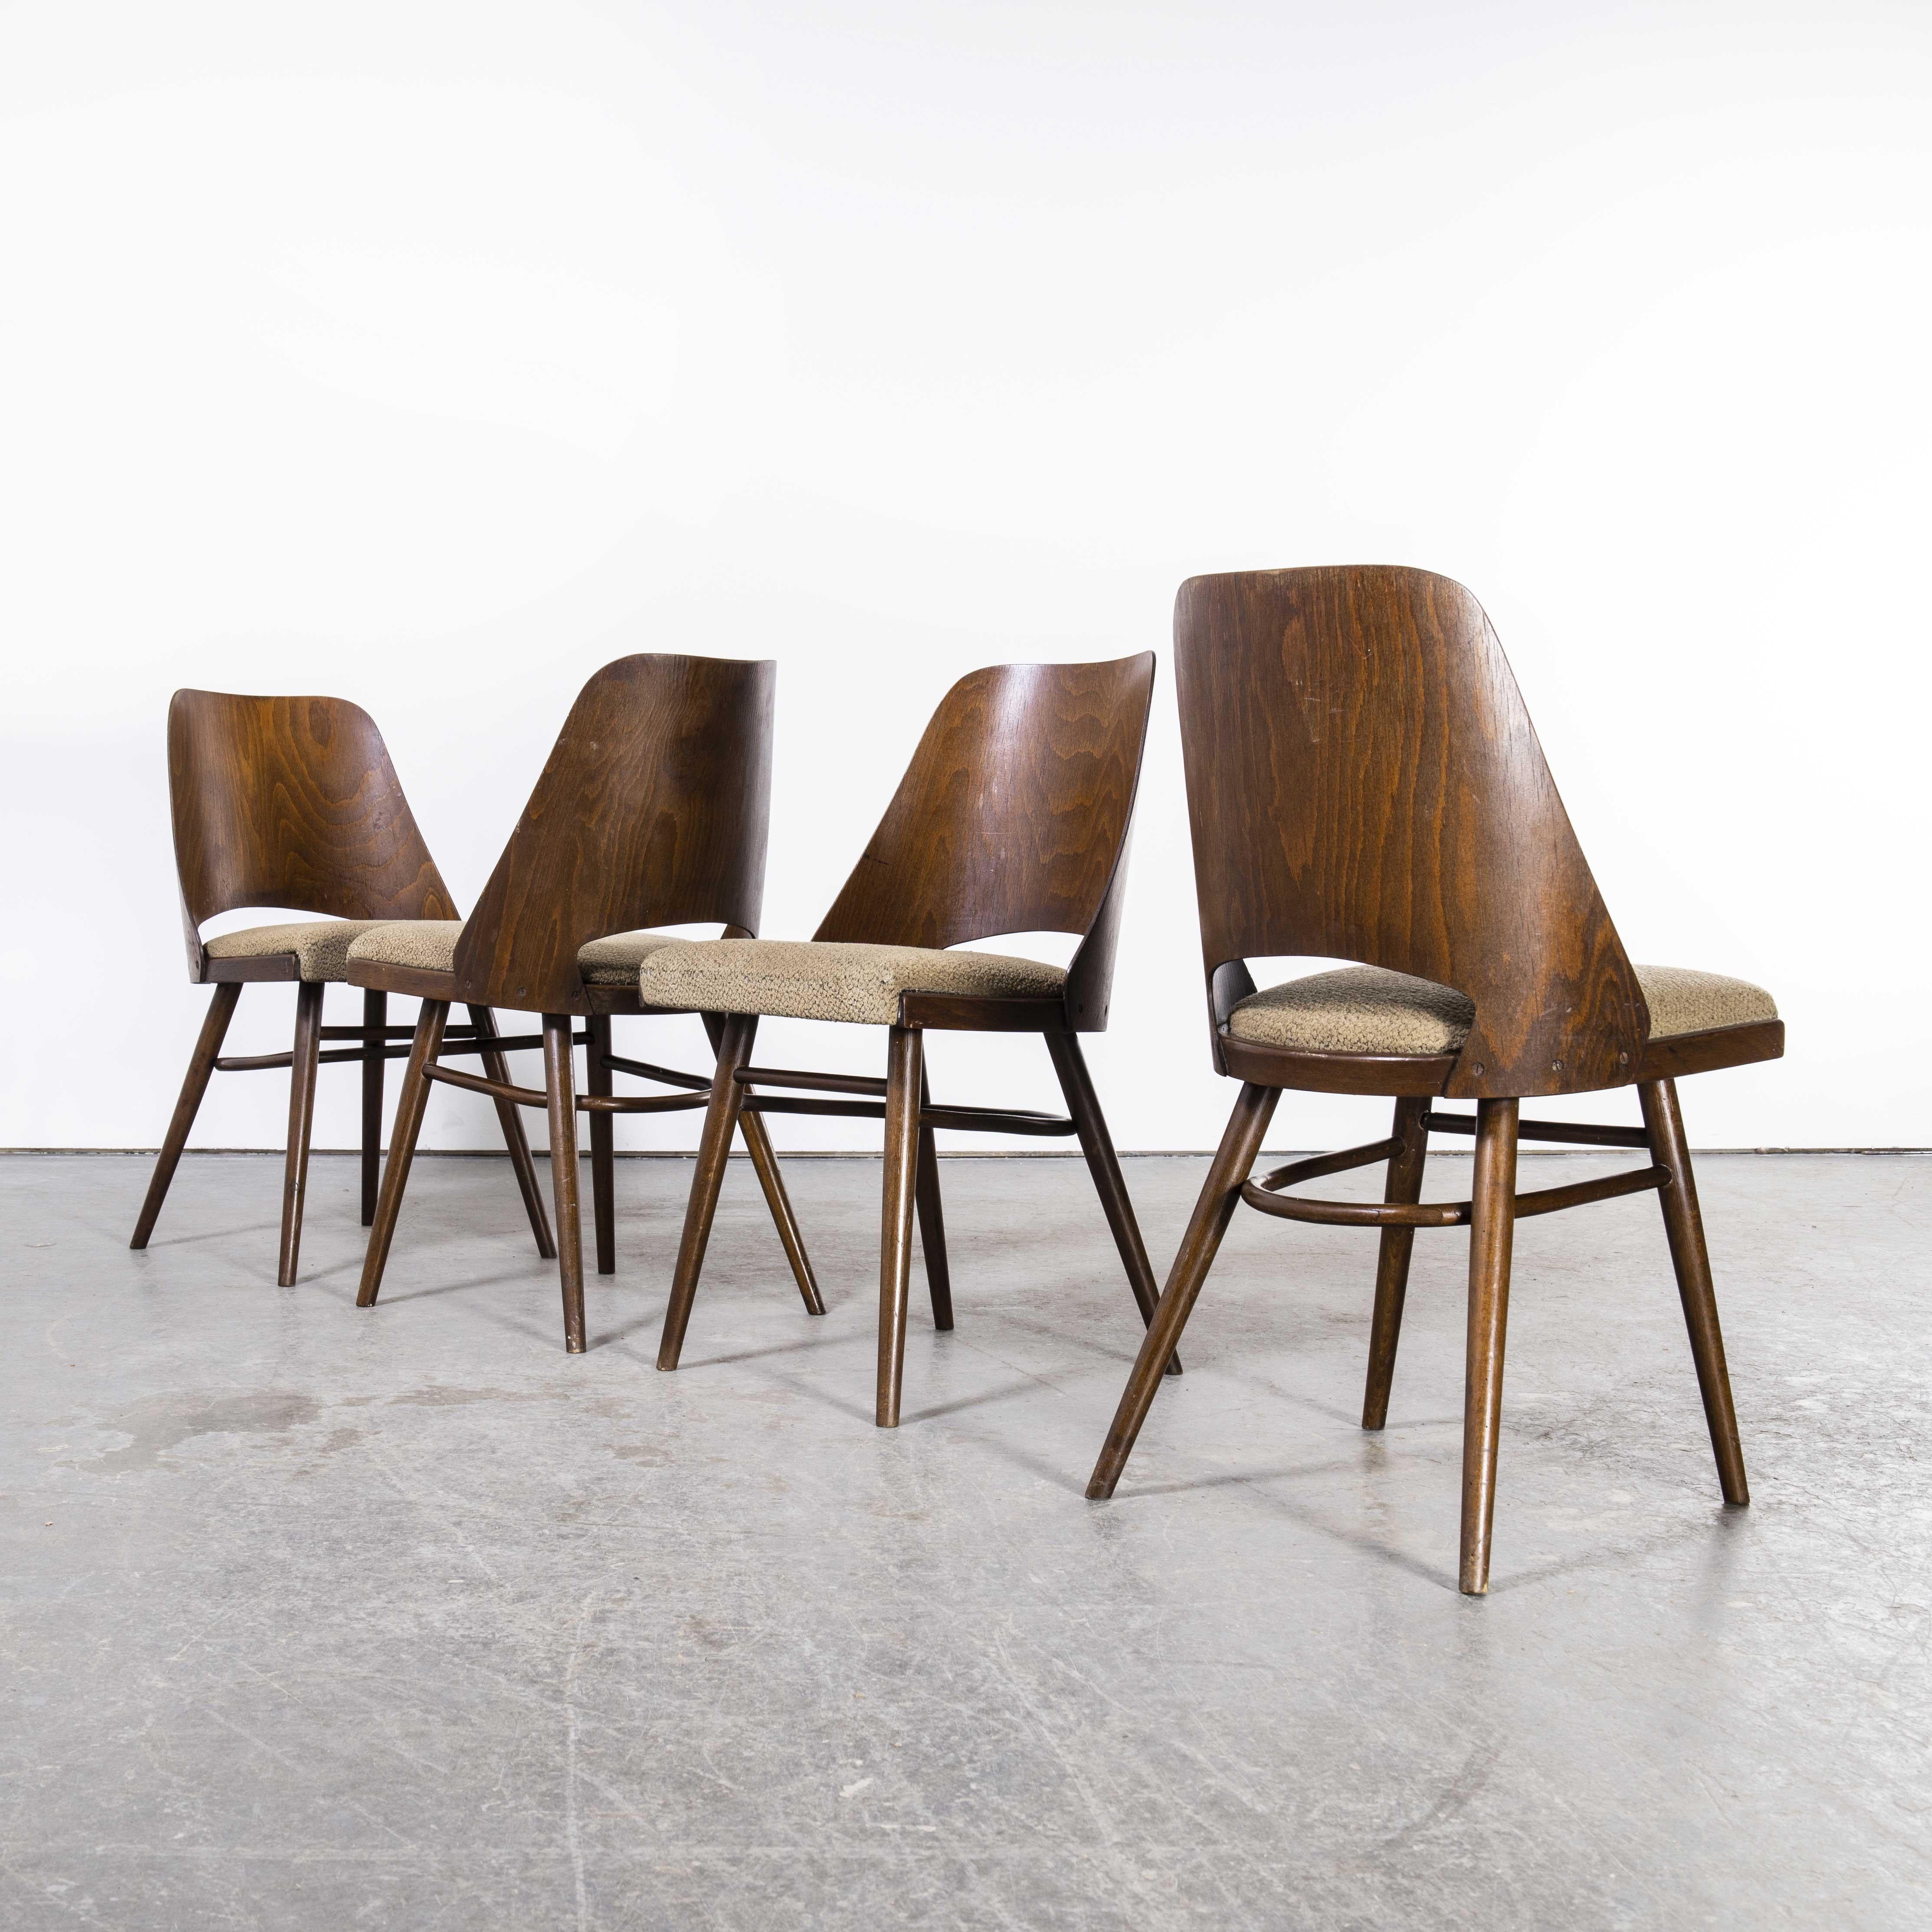 1950's Upholstered Thon Dining Chairs by Radomir Hoffman, Set of Four Dark Waln For Sale 2